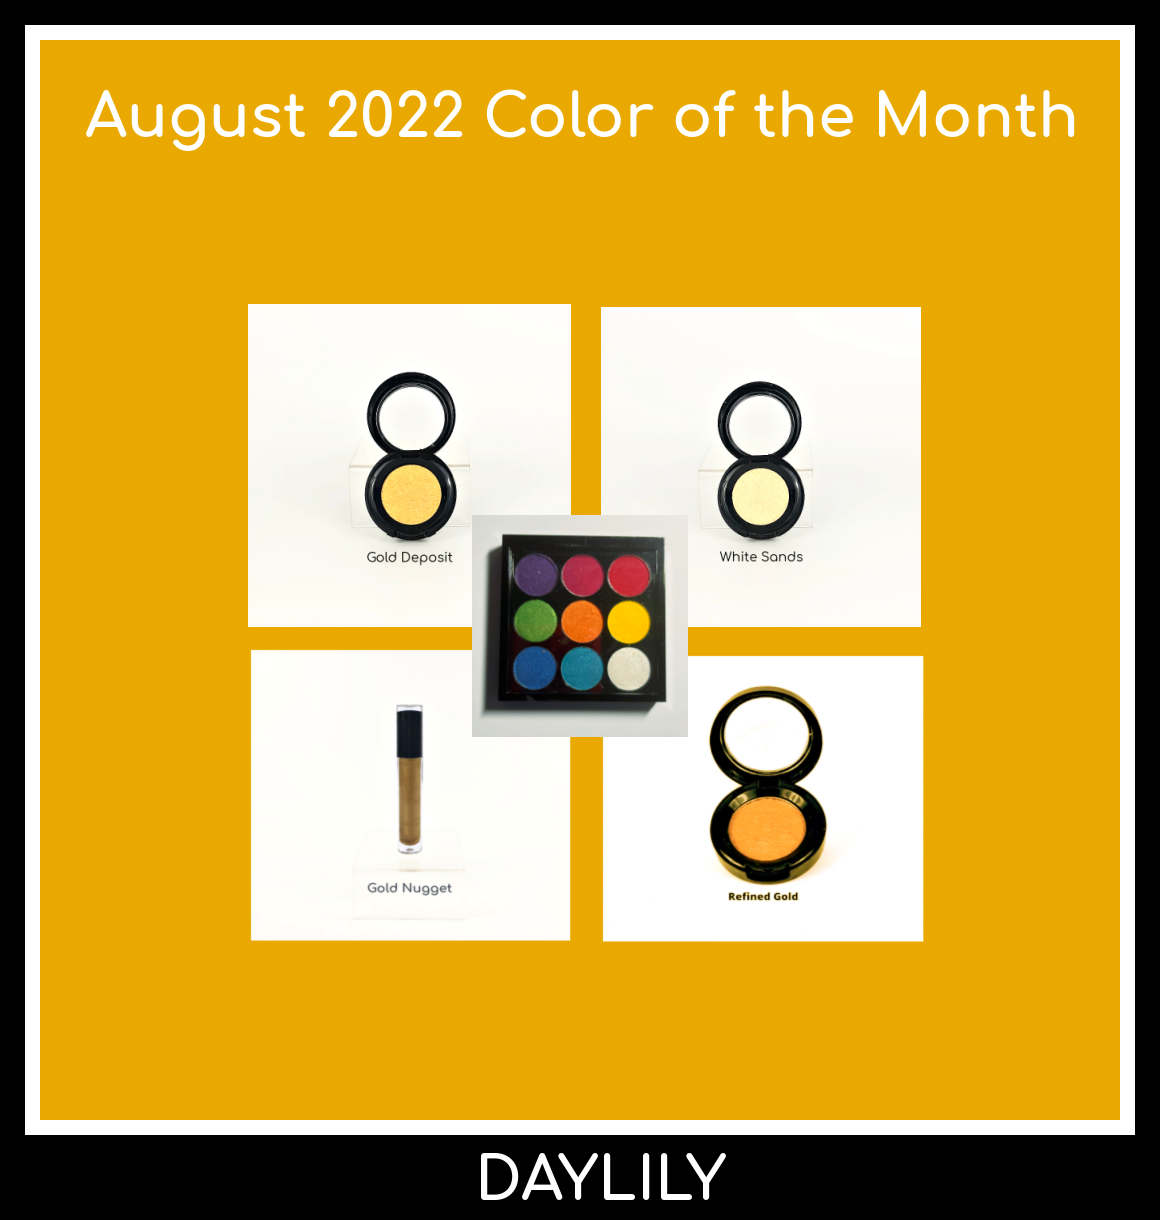 August 2022 Color of the Month is Daylily